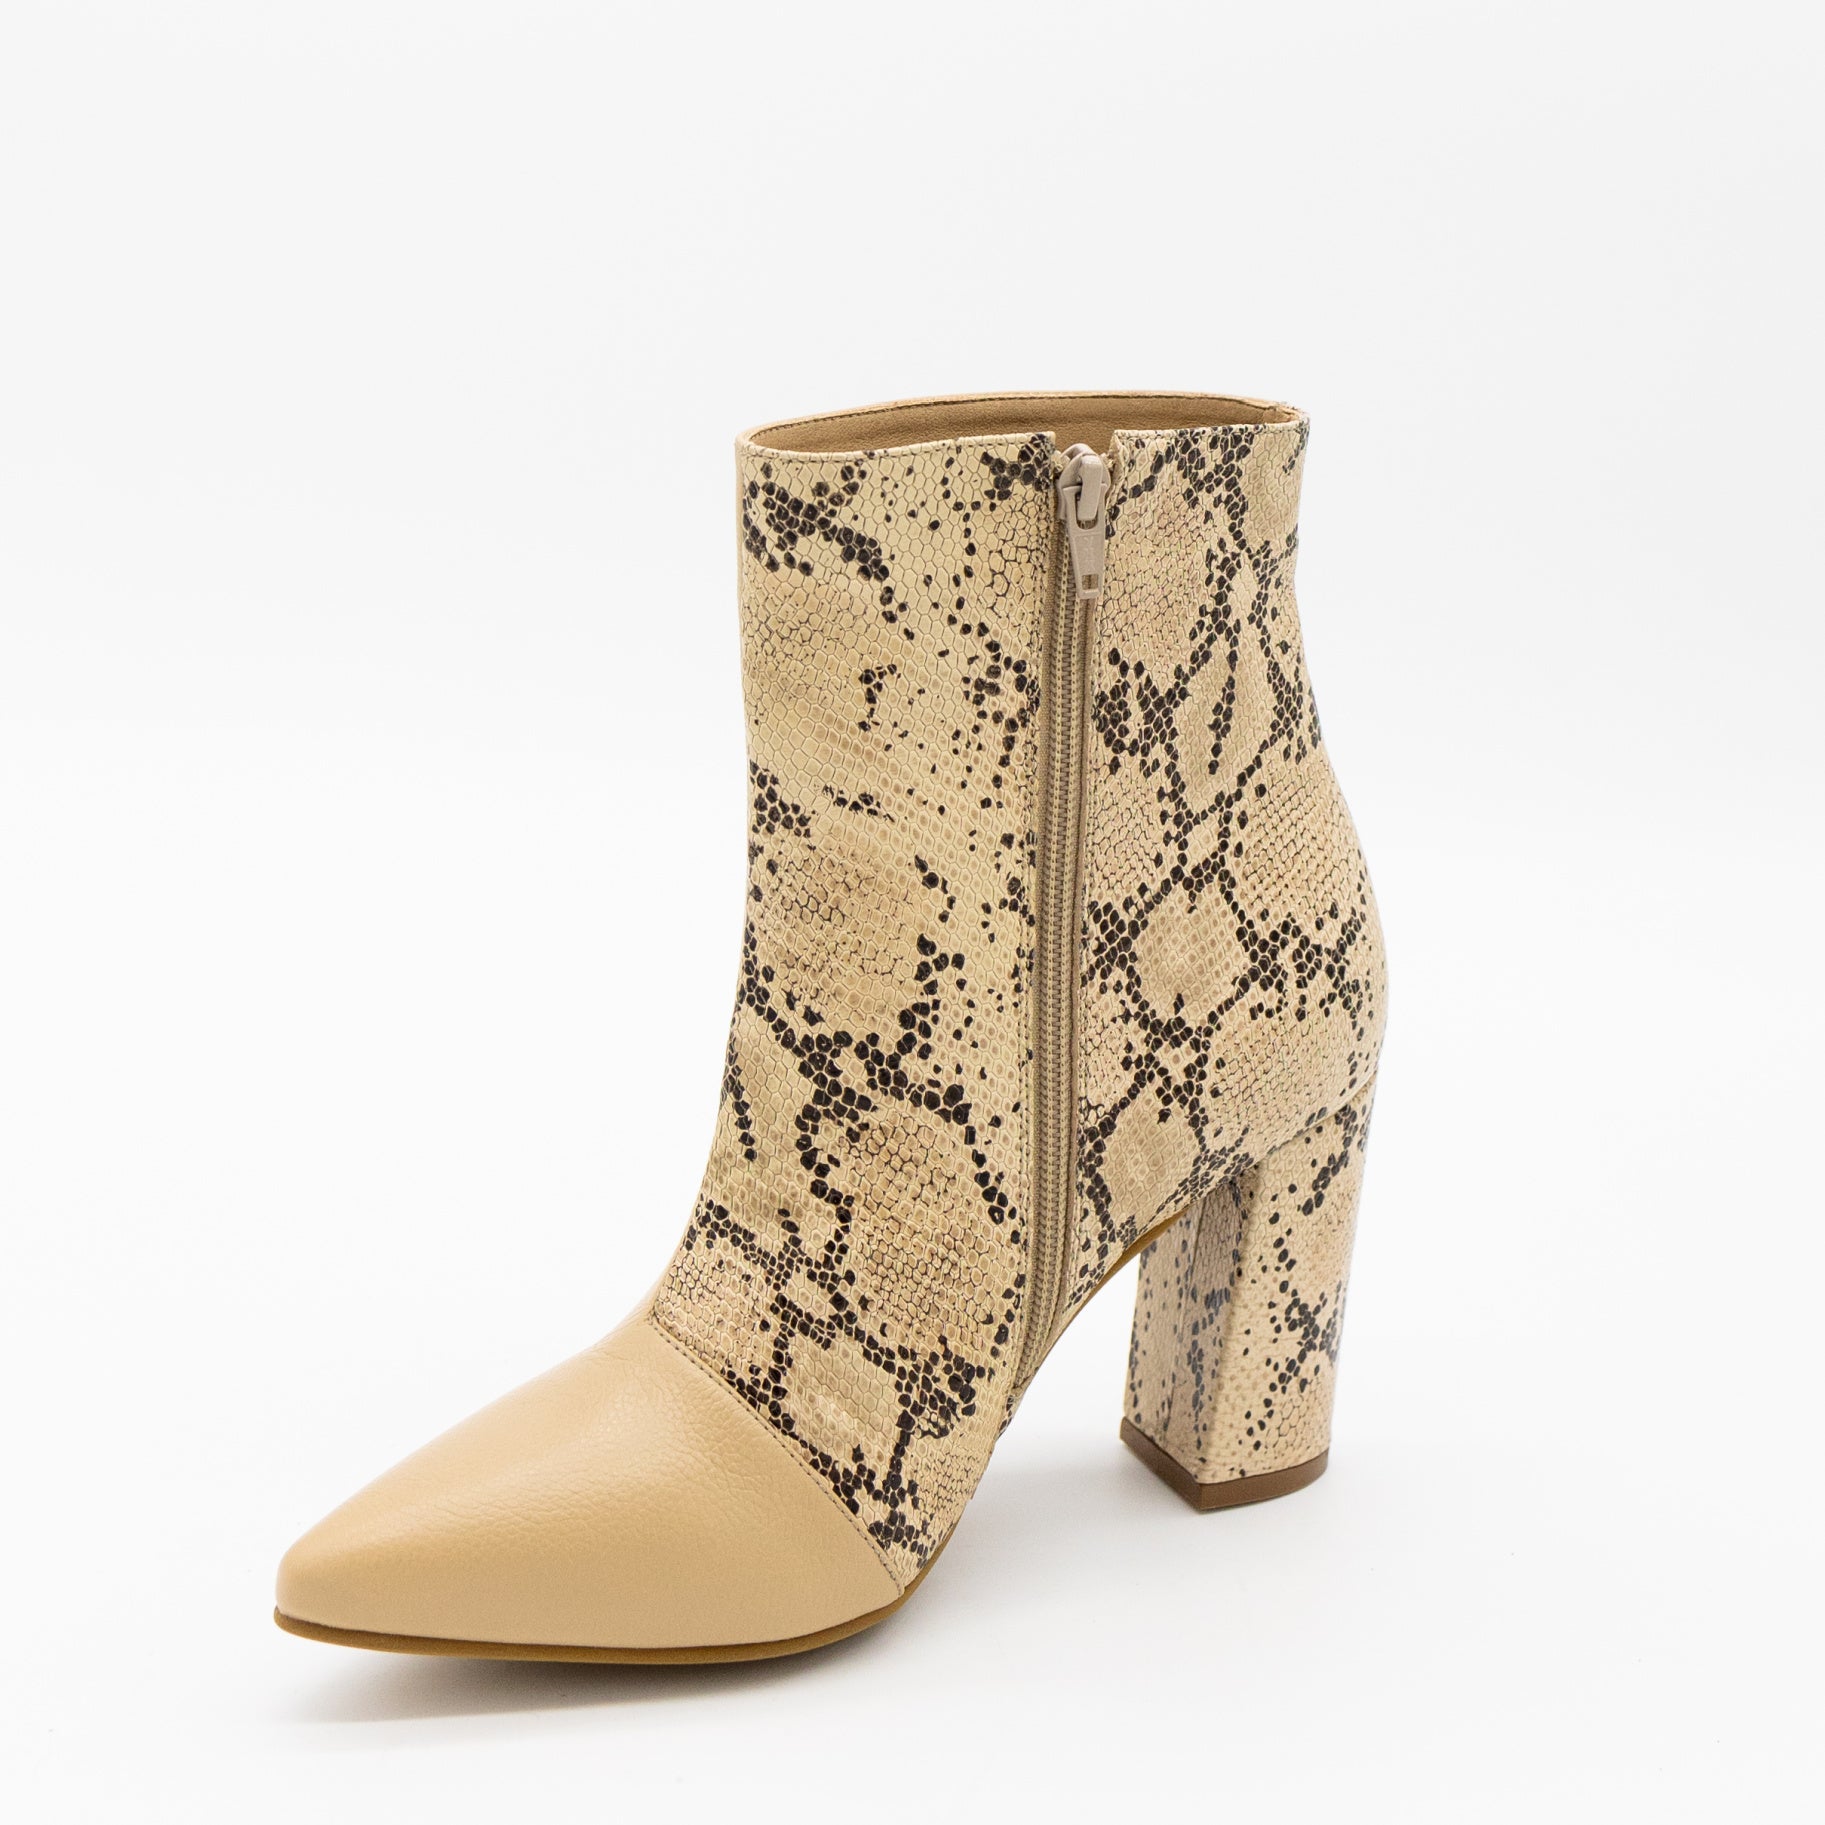 Handcrafted Leather Heeled Boot, Tan Arequipe Smooth Leather and Embossed Leather Sand Snakeskin. Stivali New York